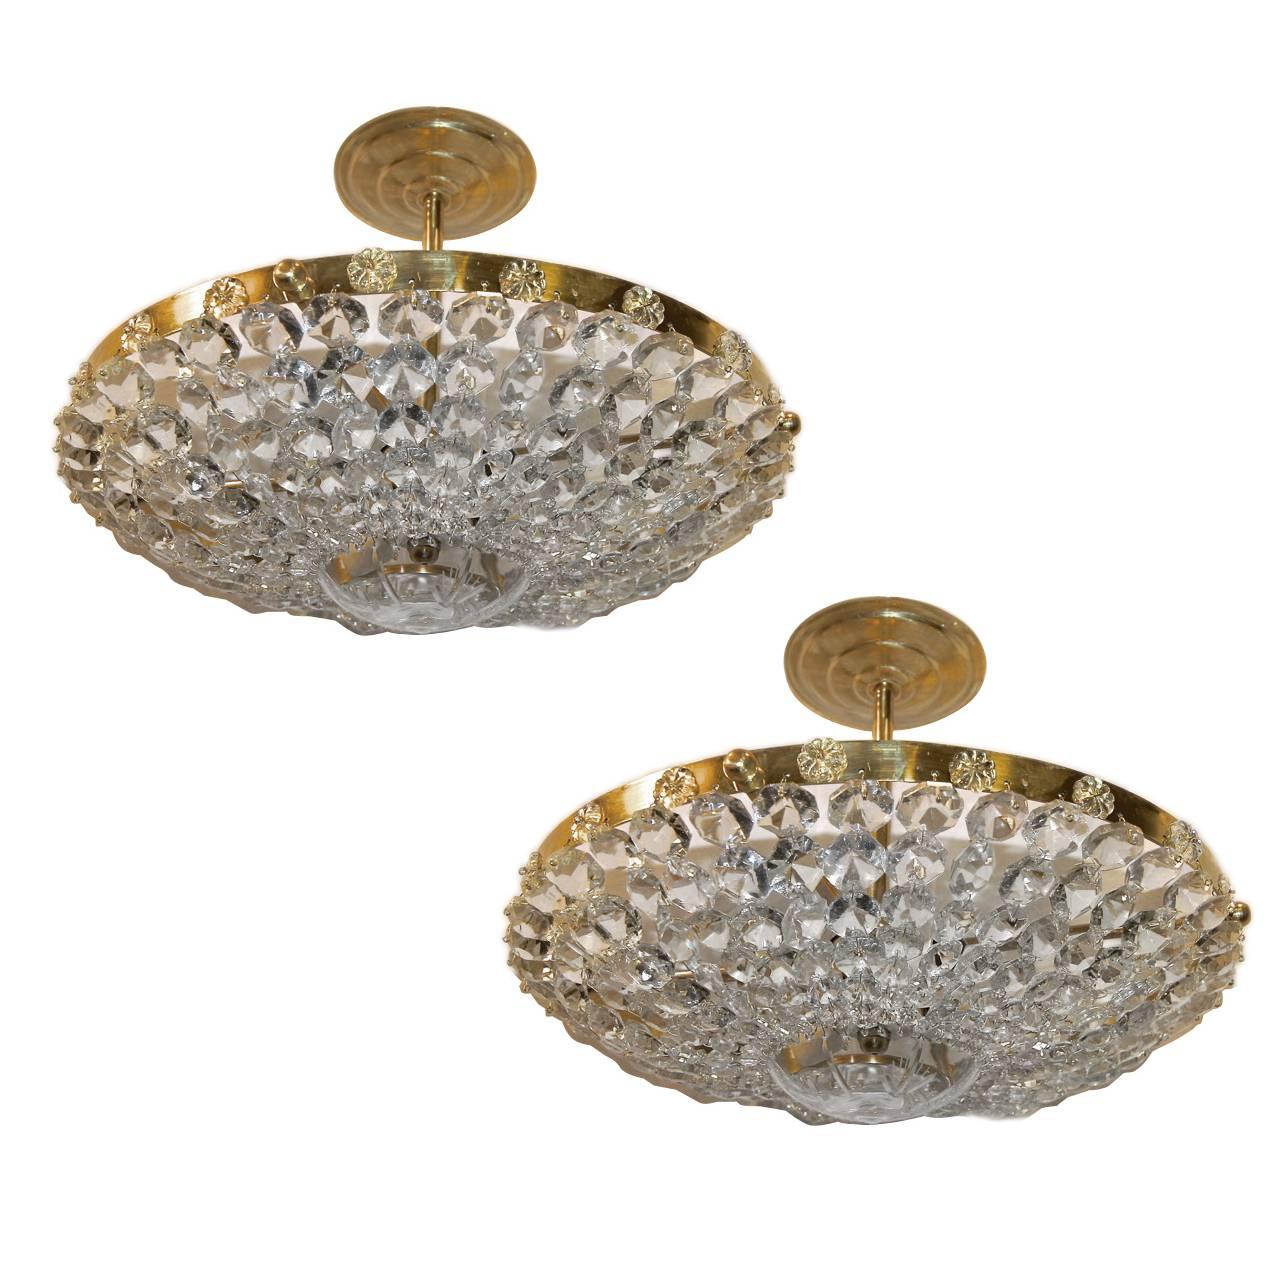 A matching set of circa 1940s French crystal semi flush-mounted light fixtures with 3 interior lights each. The crystals with etched crystal center piece and rosettes on body. 

Measurements: 
Drop: 7.5